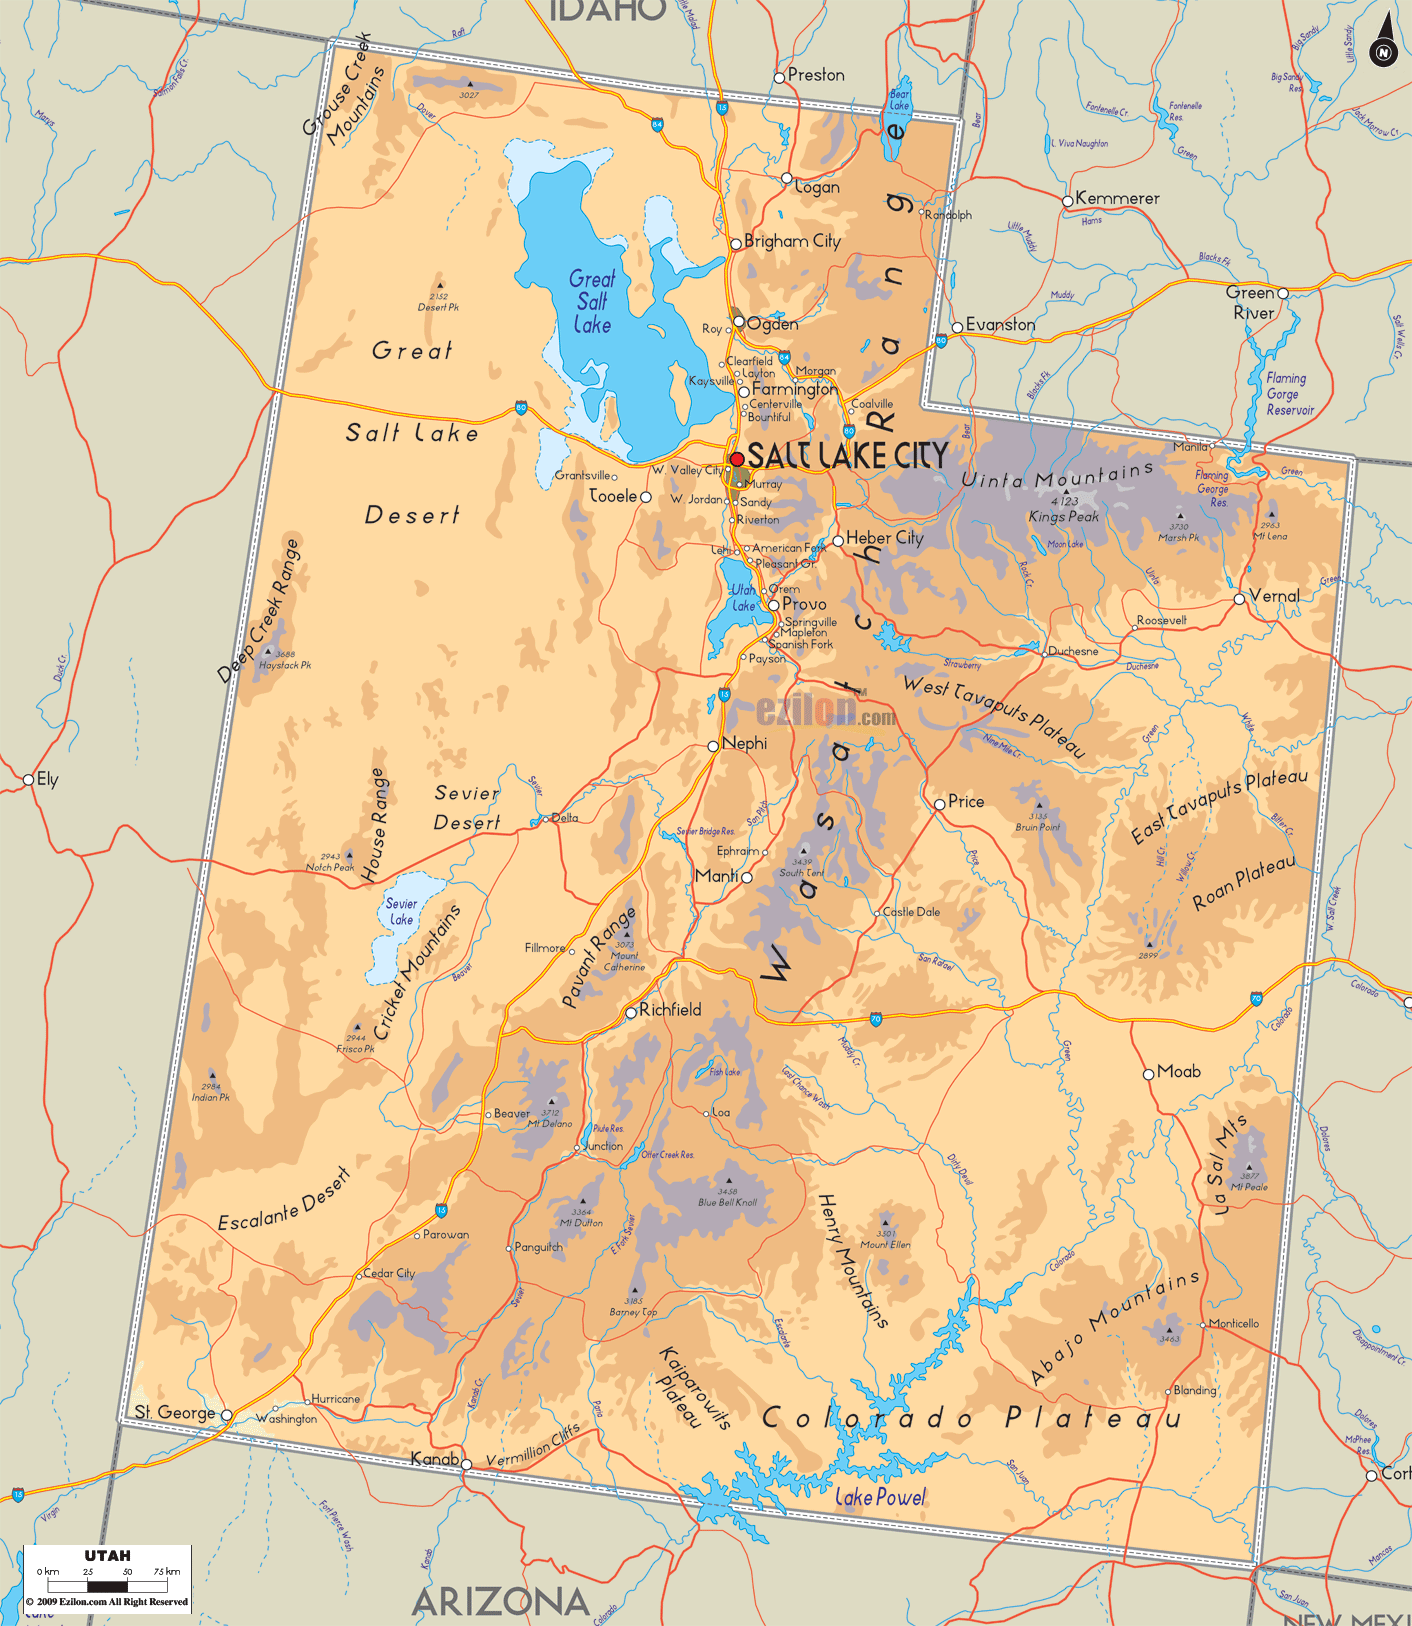 The Physical map of Utah State, USA showing major geographical features such as rivers, lakes, mountains, topography and land formations.